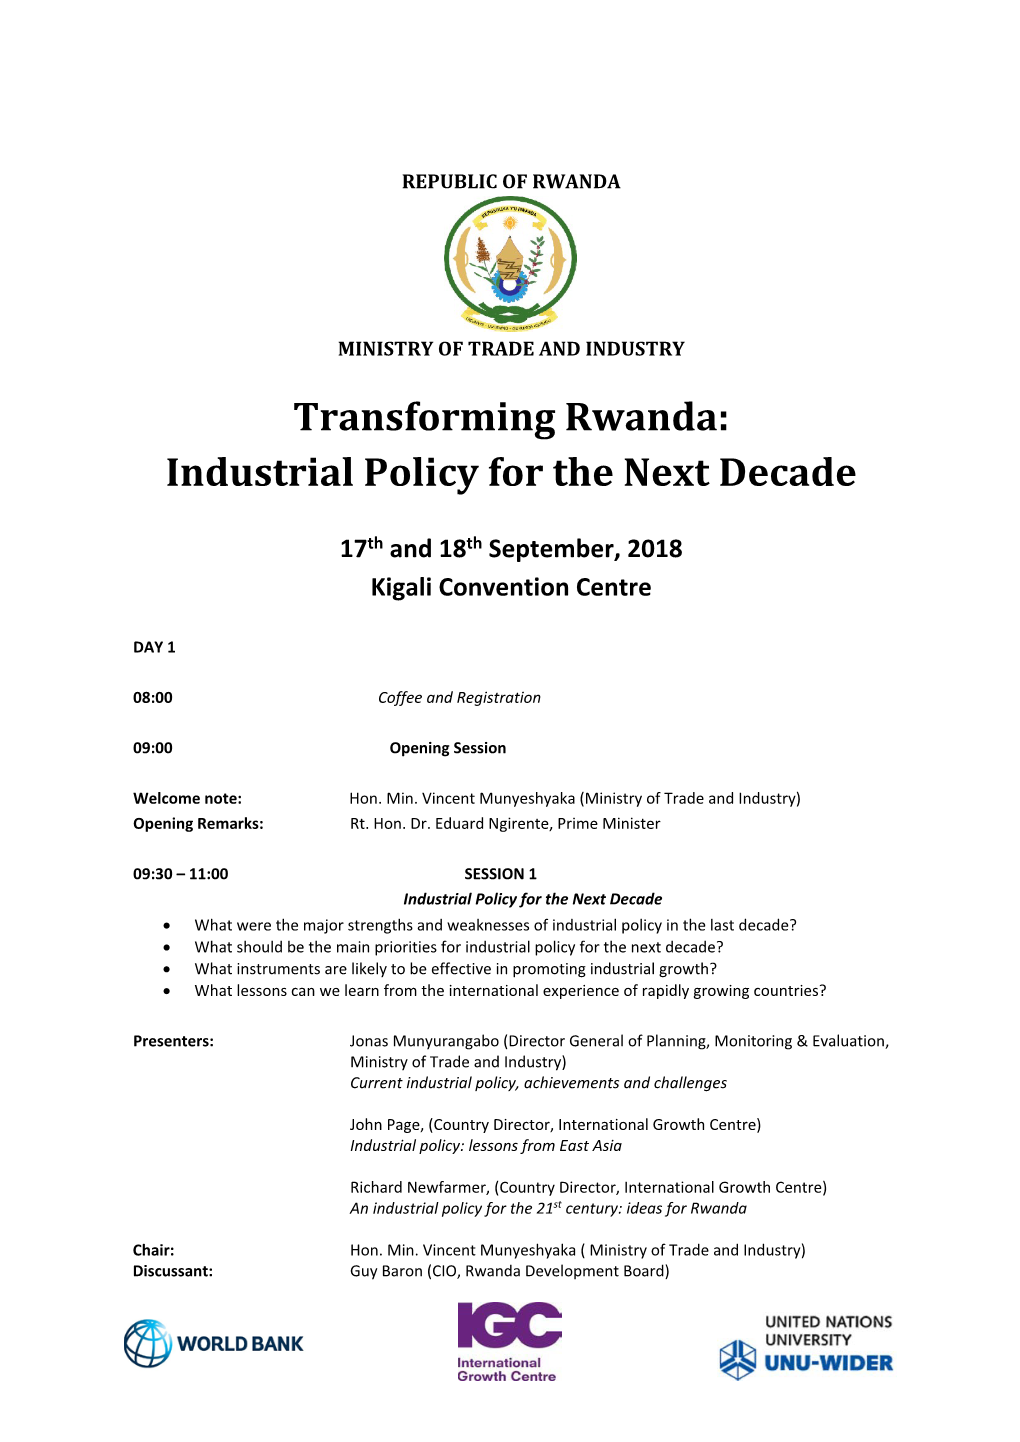 Transforming Rwanda: Industrial Policy for the Next Decade